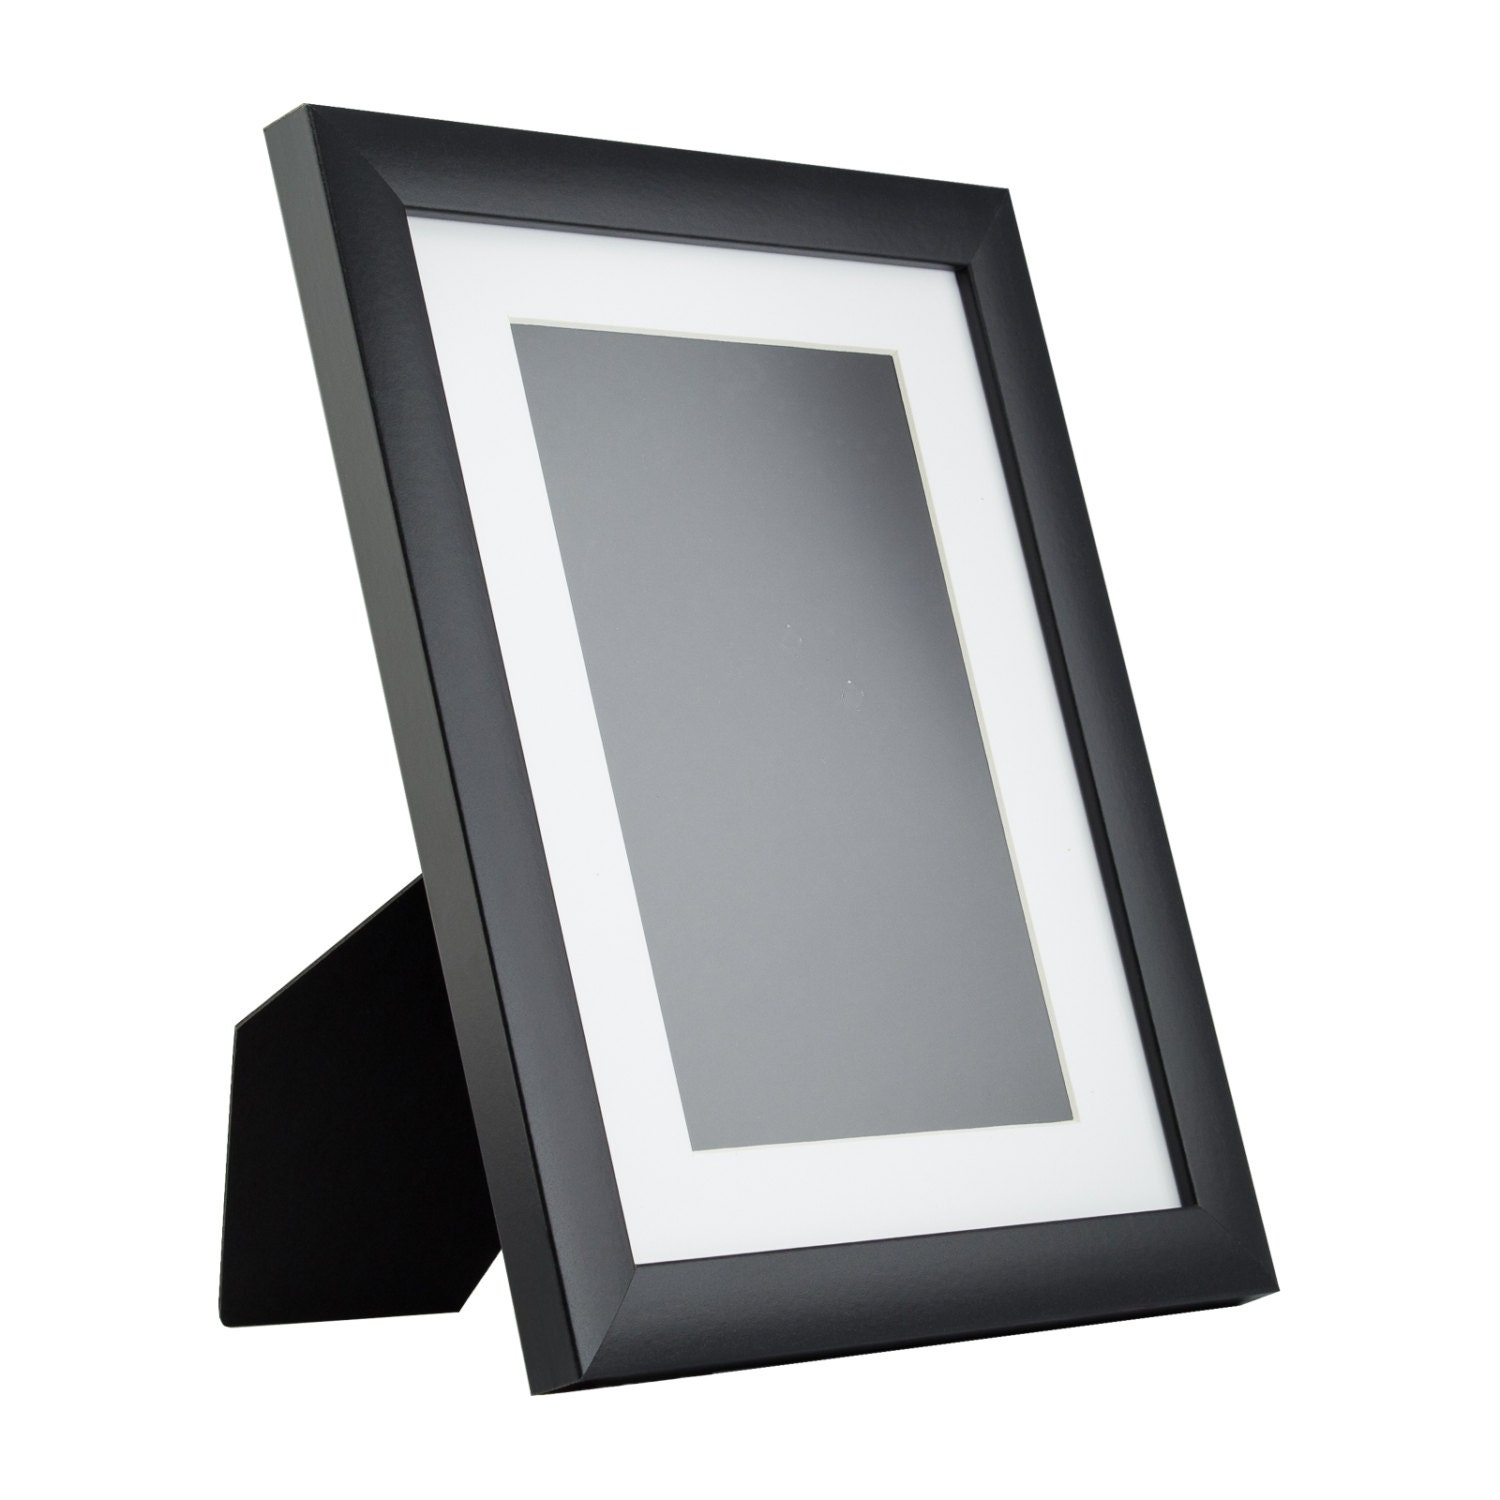 Craig Frames 1WB3BK 8.5 x 11 Inch Black Picture Frame Matted to Display a 6 x 9 Inch Photo 